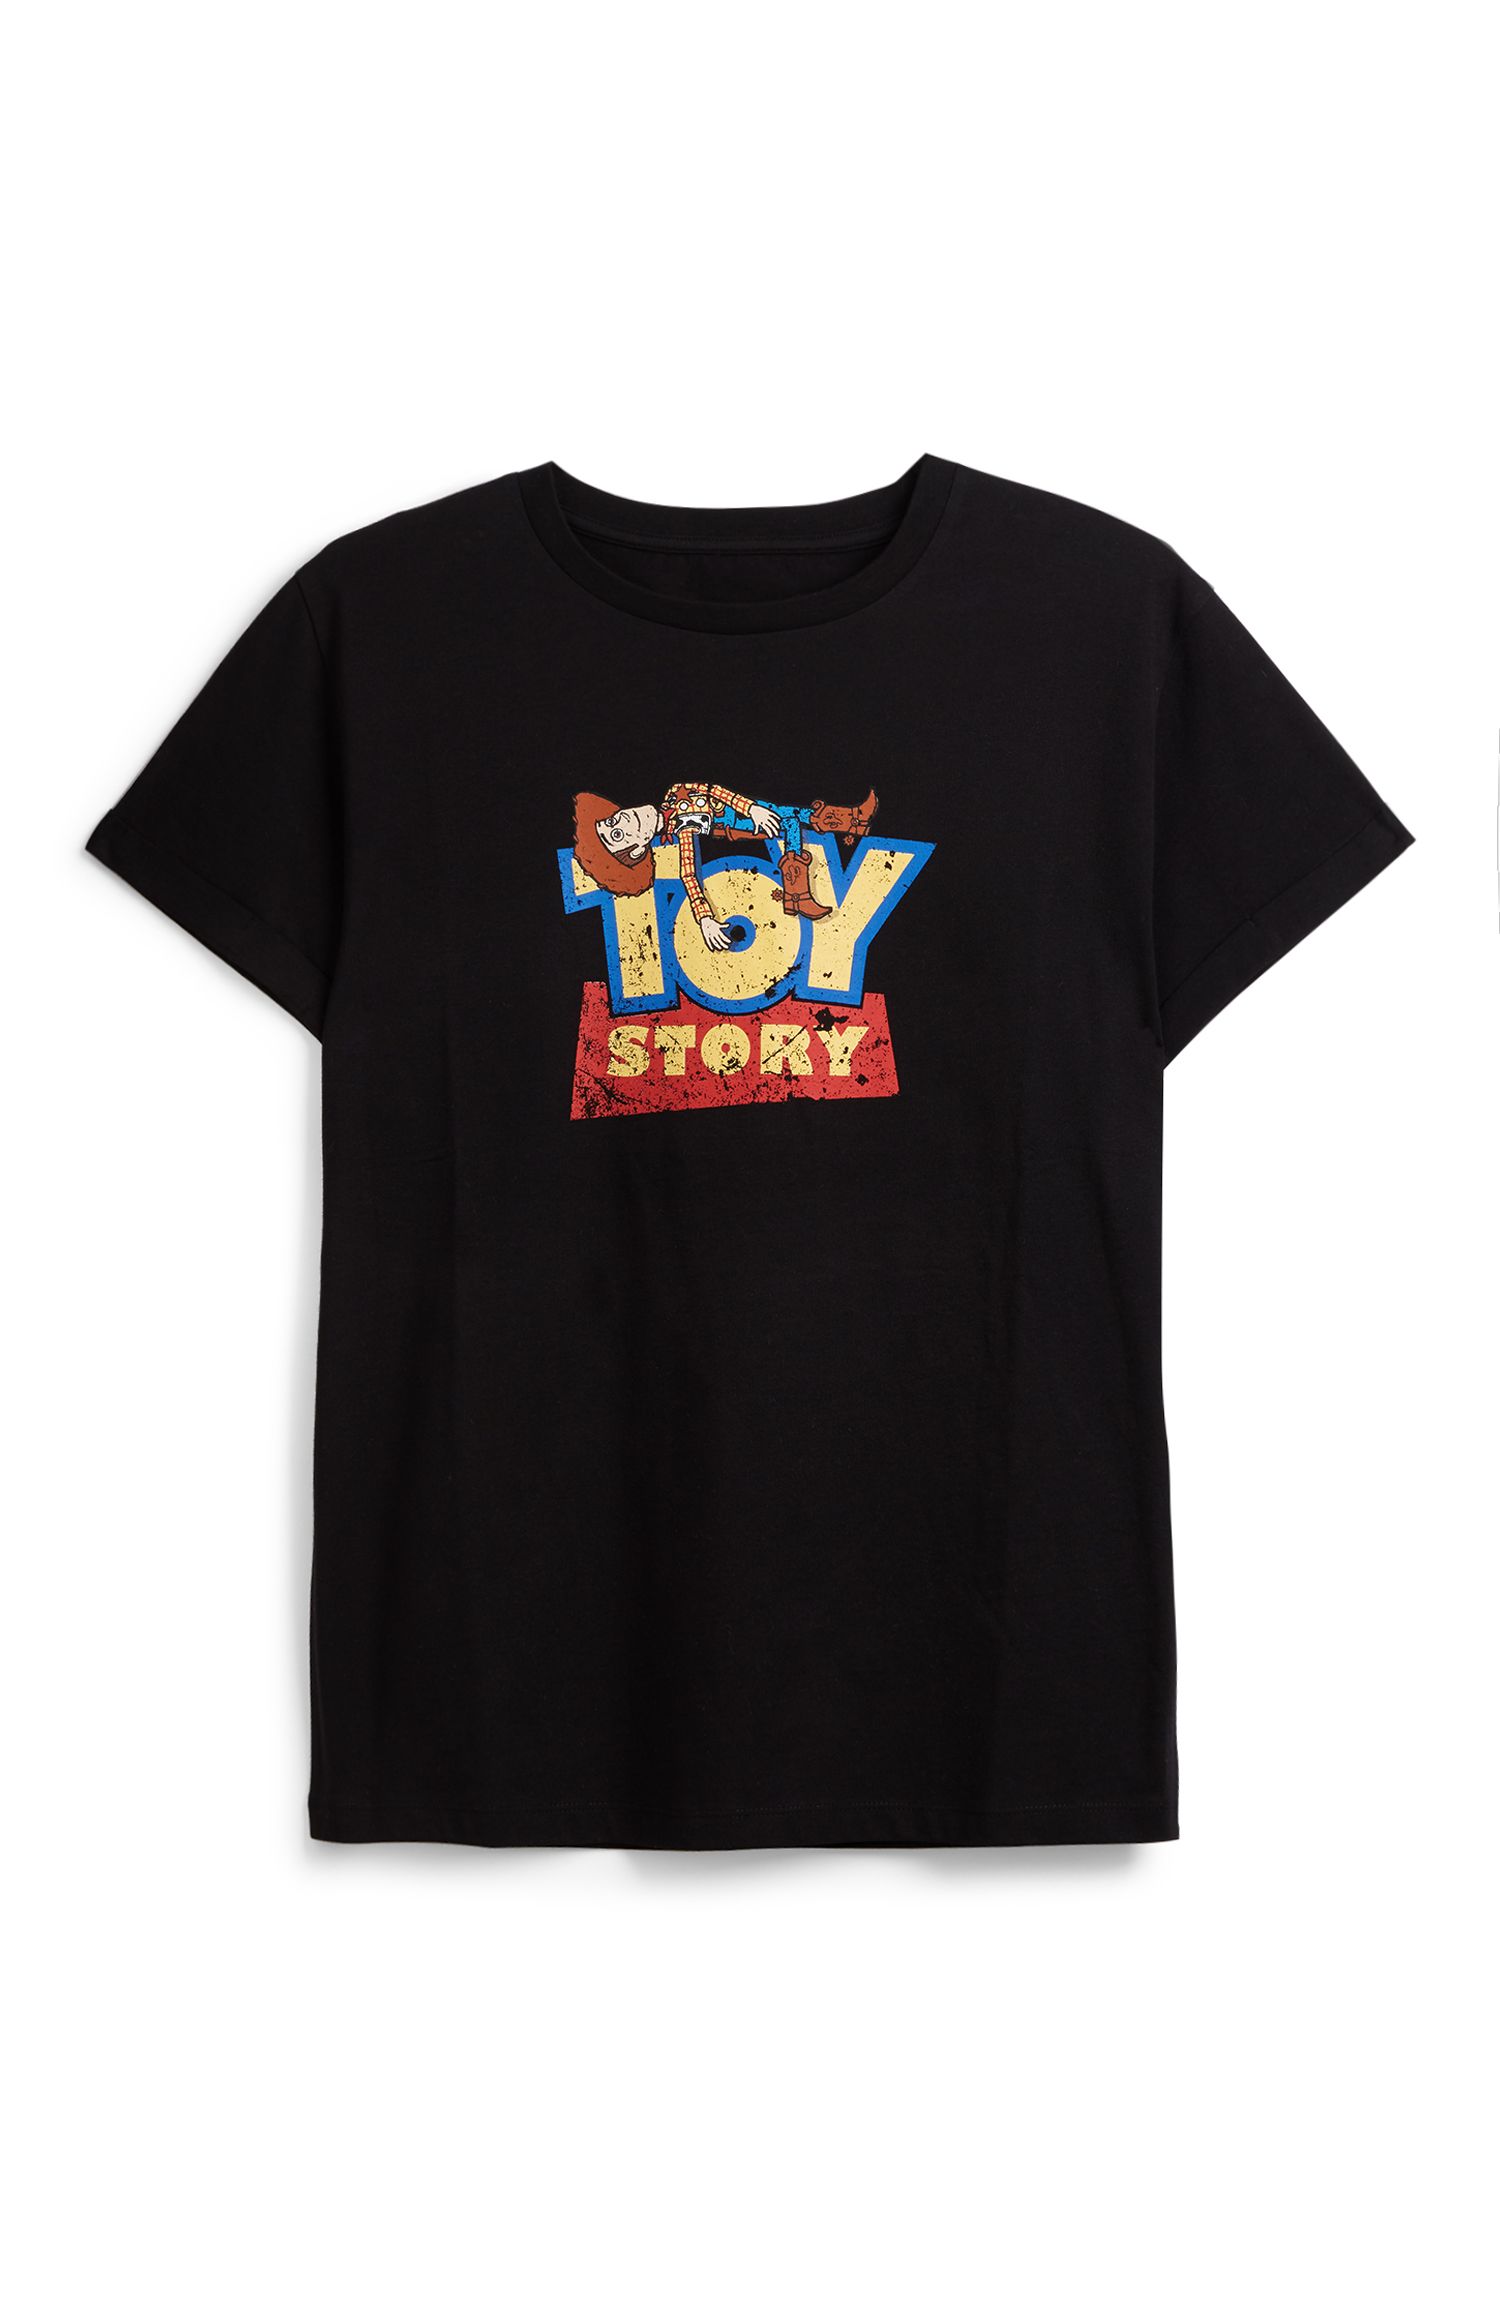 top SIZES shorts BNWT primark TOY STORY character 4 range t-shirt hat 